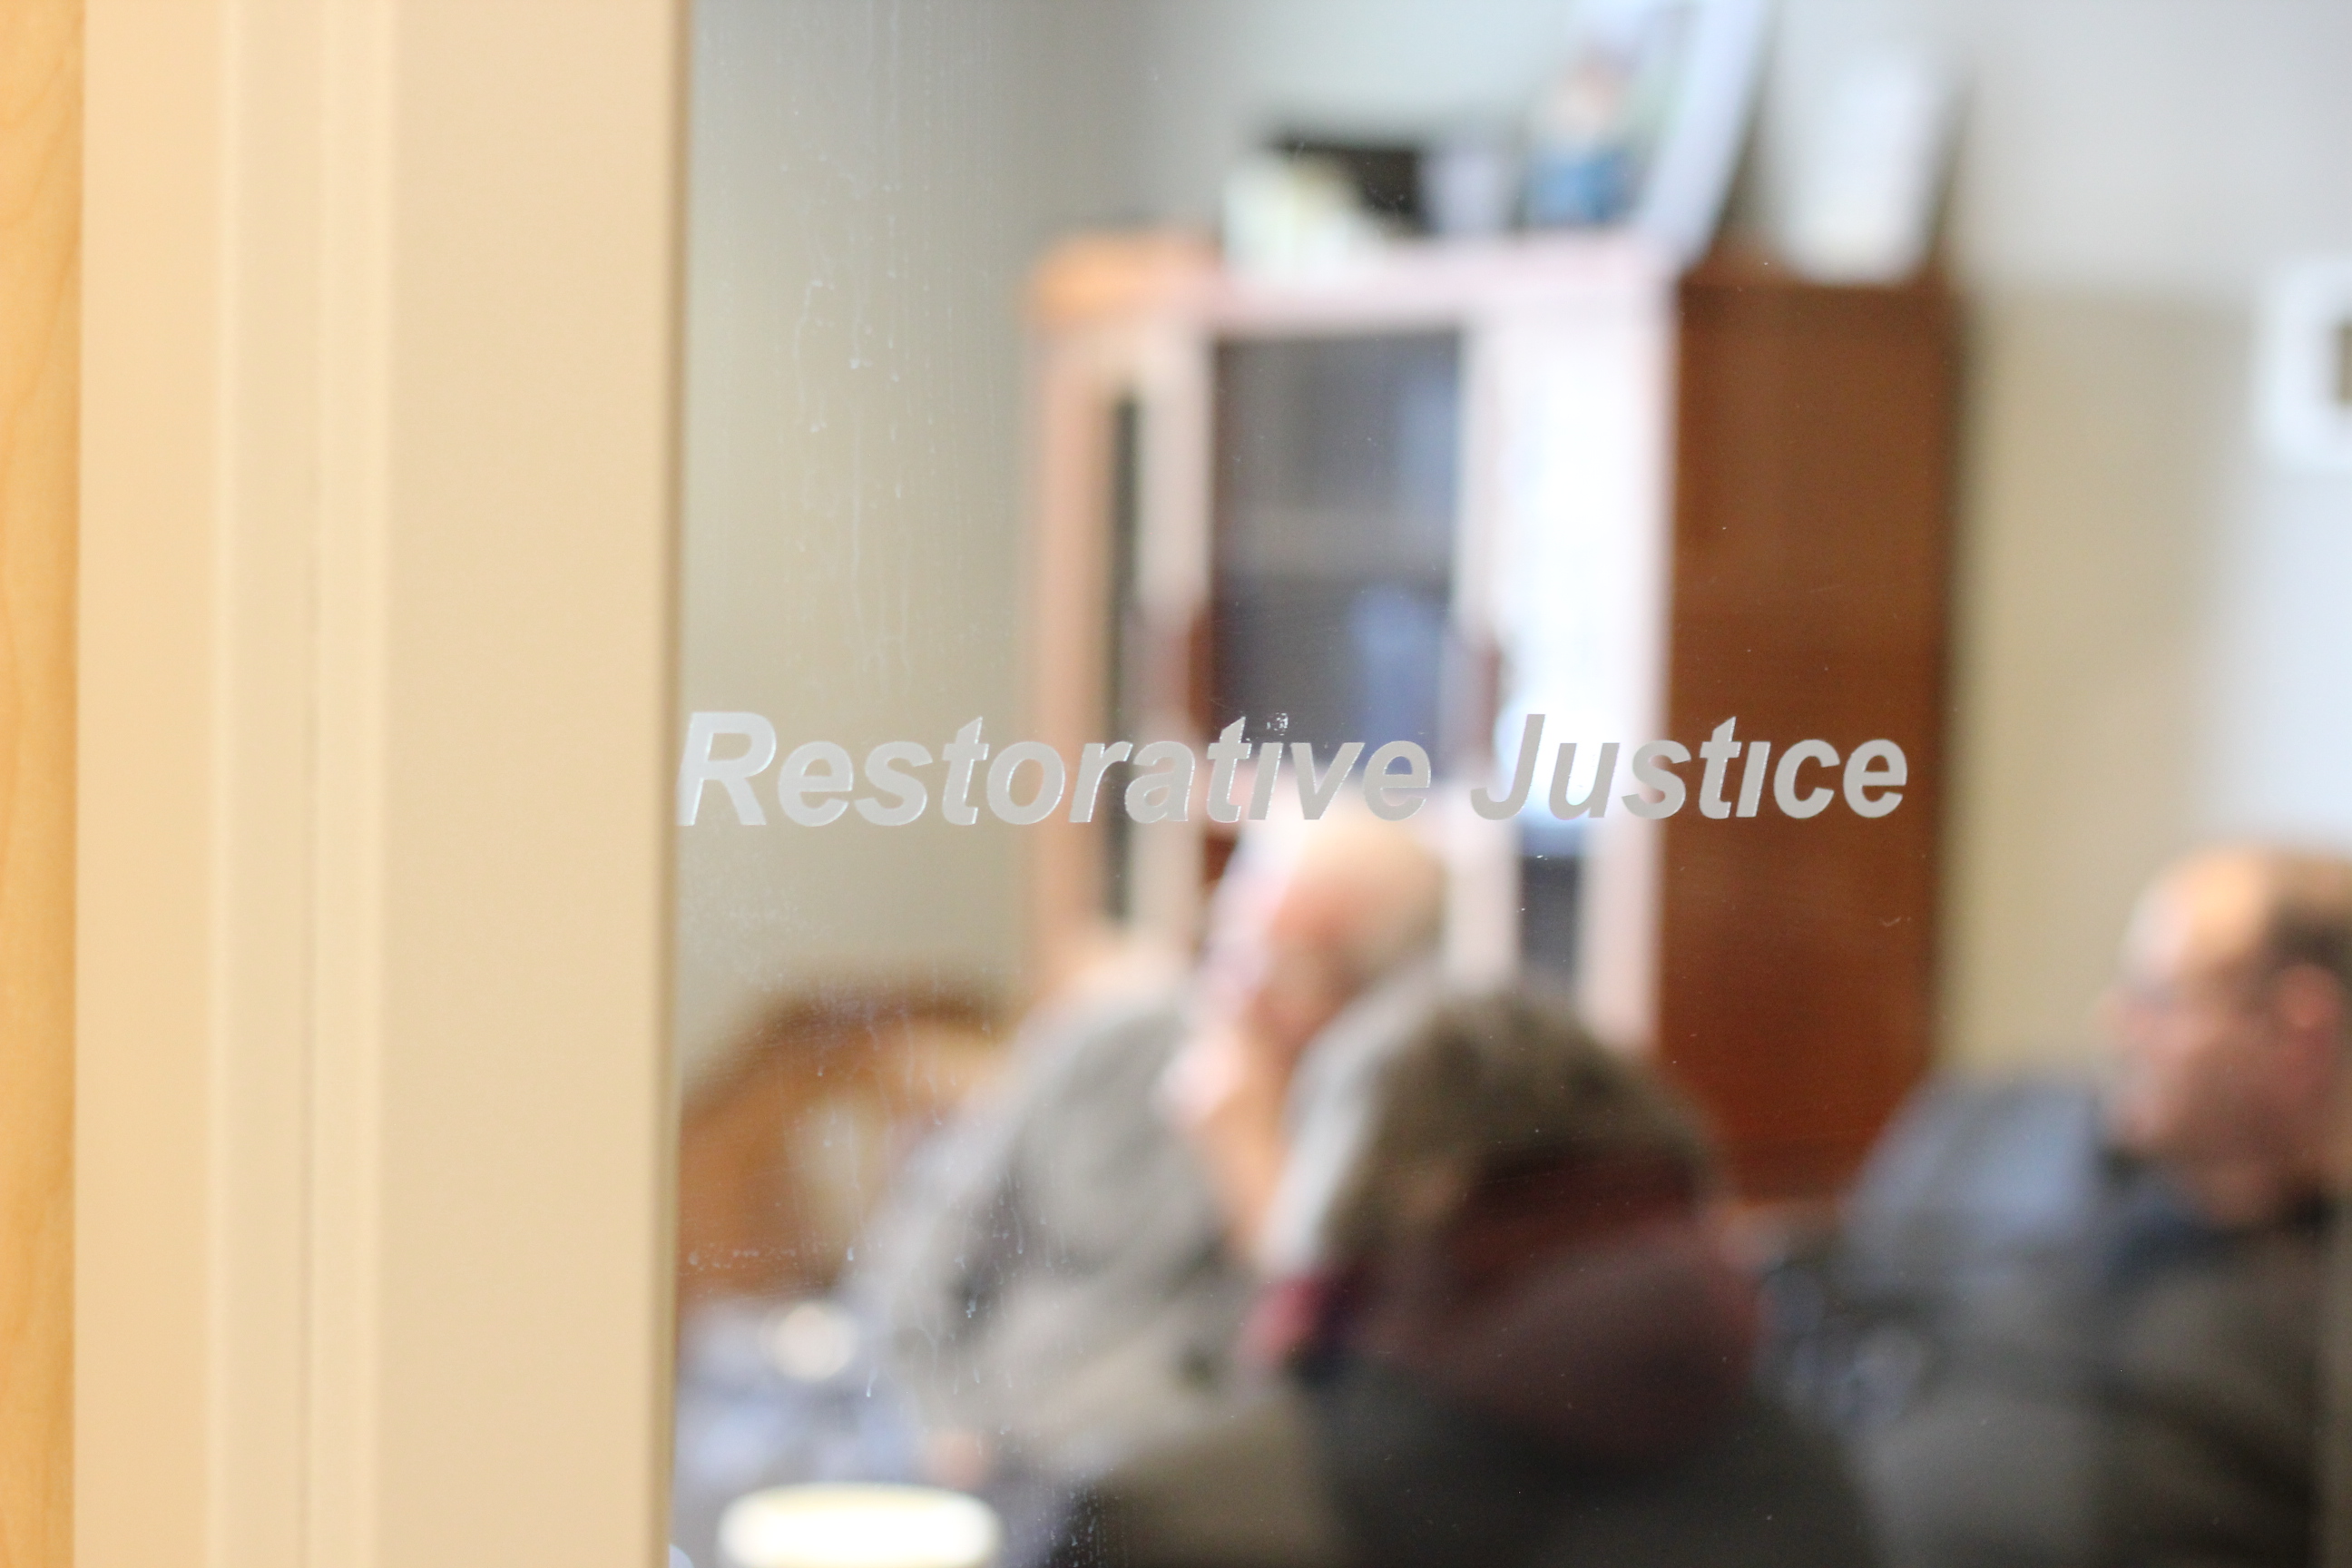 group of people in a meeting viewed through frosted glass with the words Restorative Justice on the glass